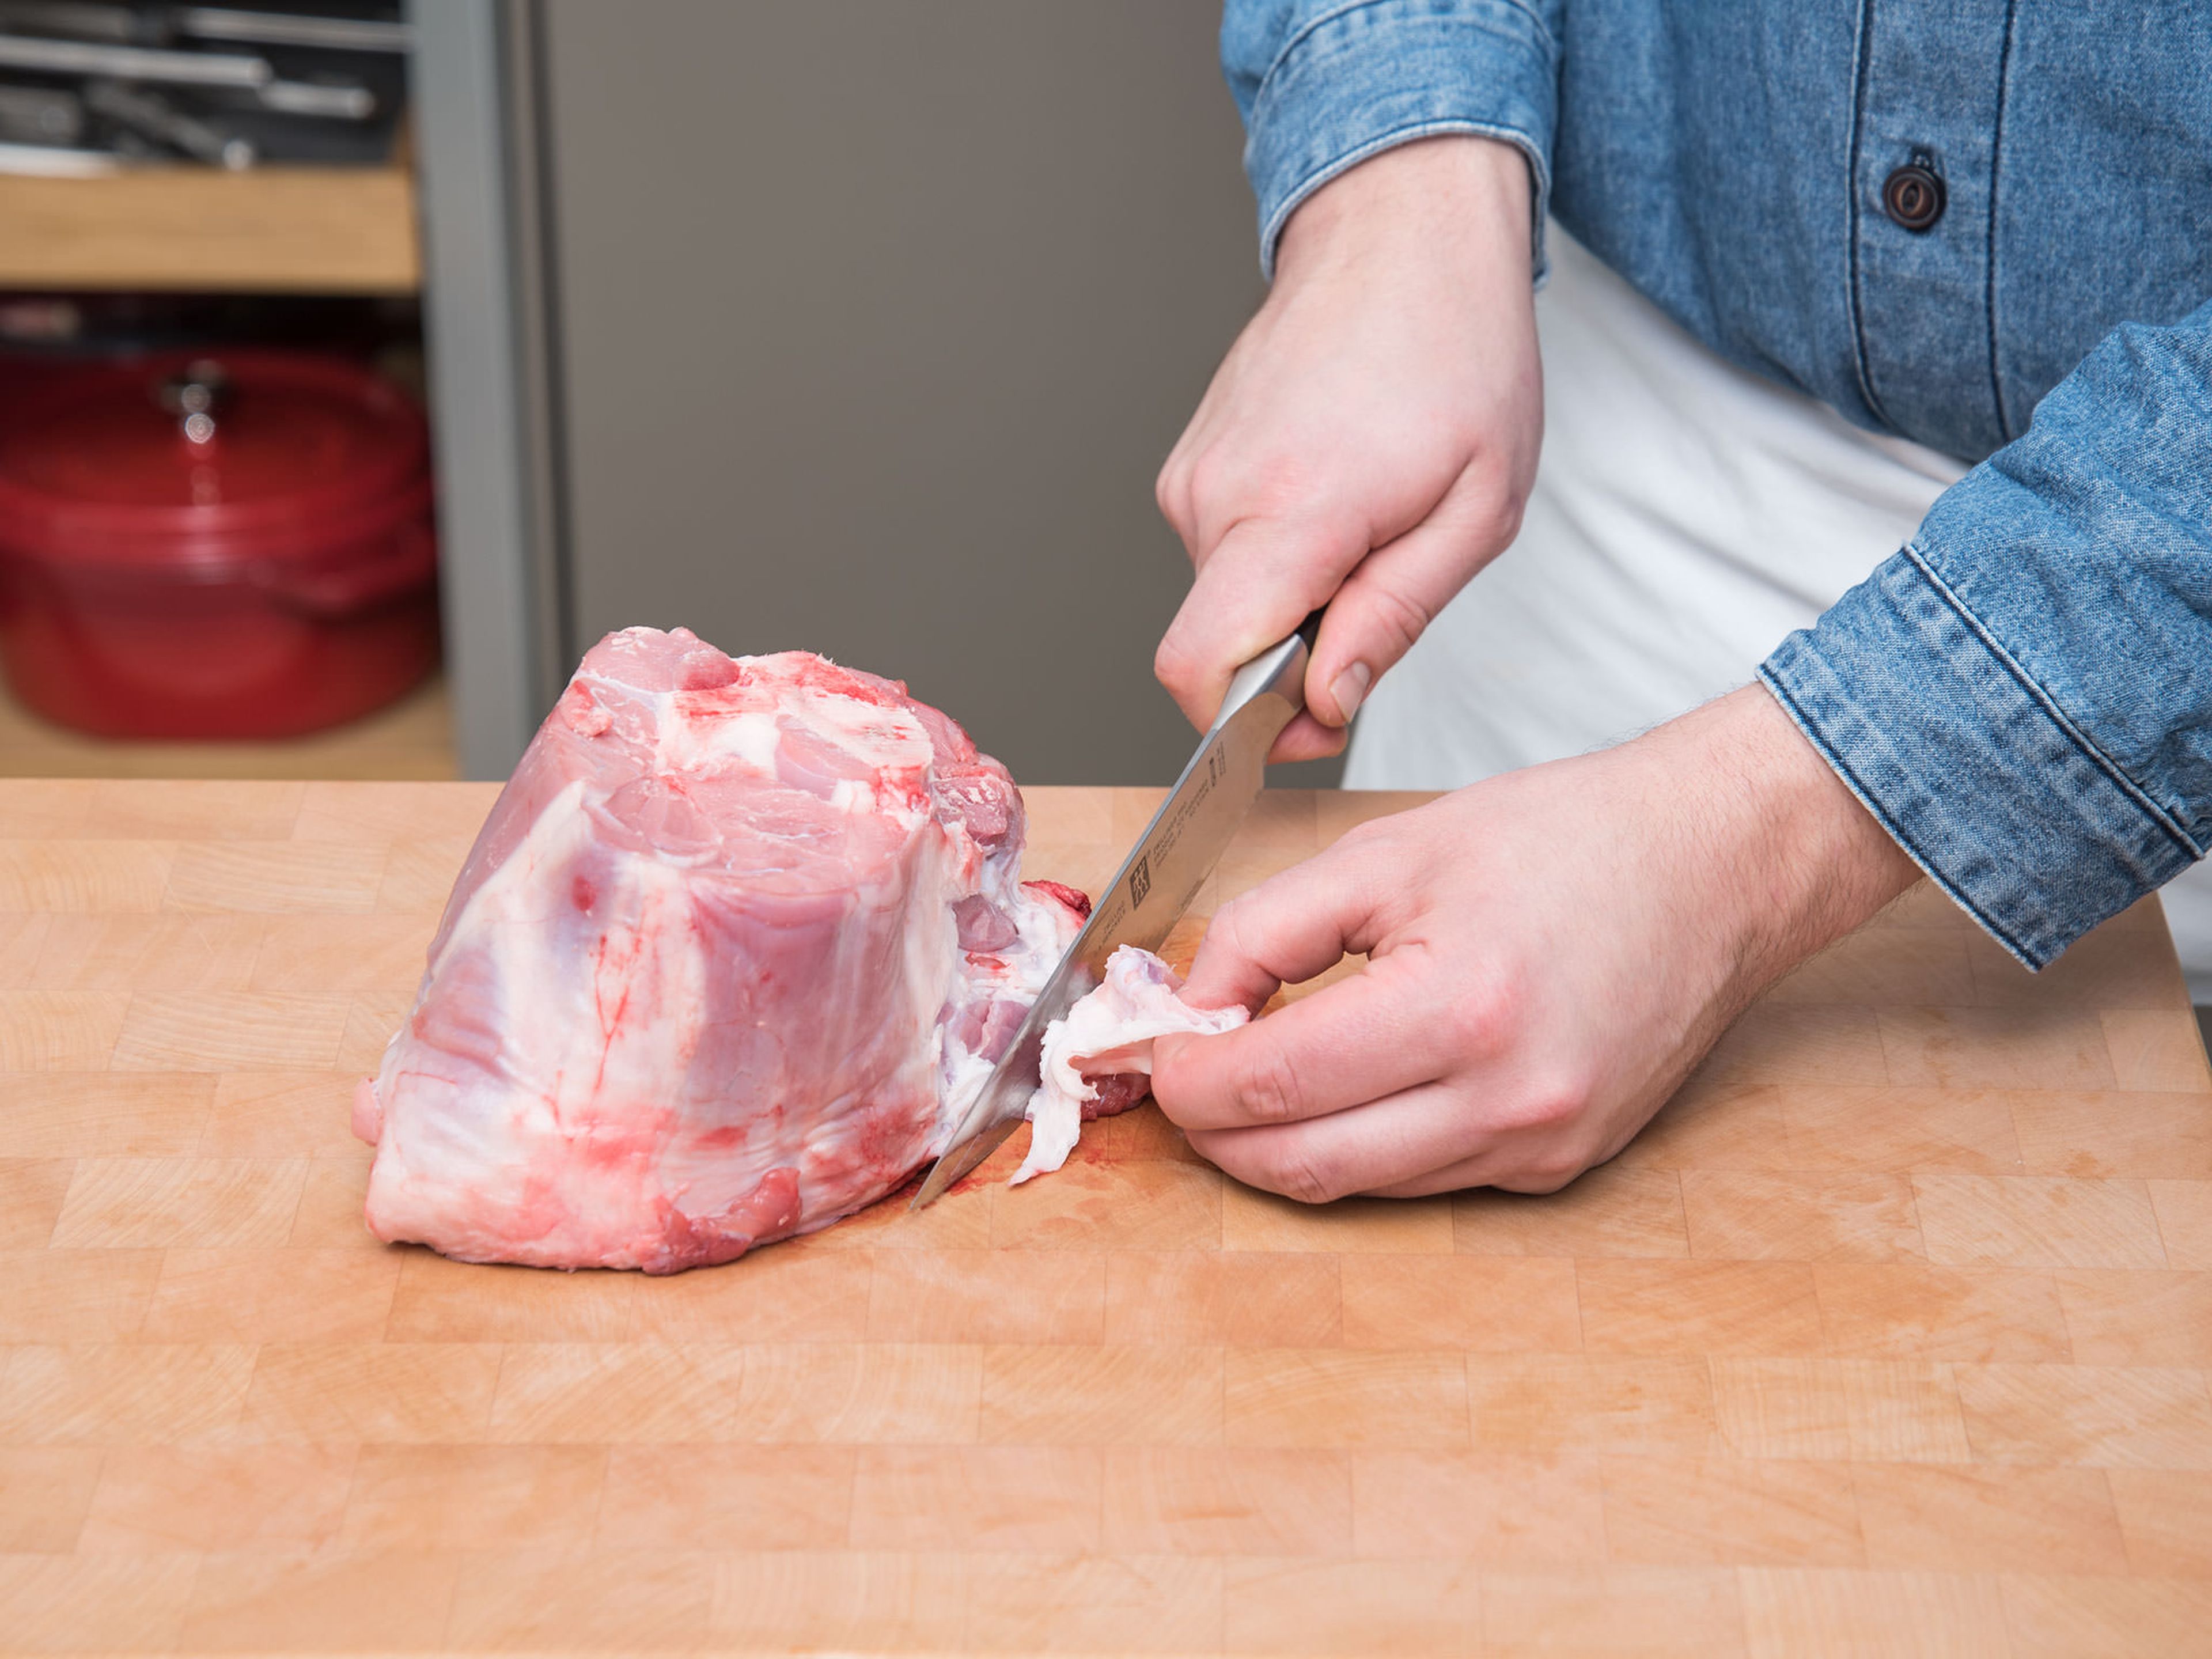 Remove bones, skin, and sinews from beef, season evenly with salt, and allow to rest for 4 hrs.